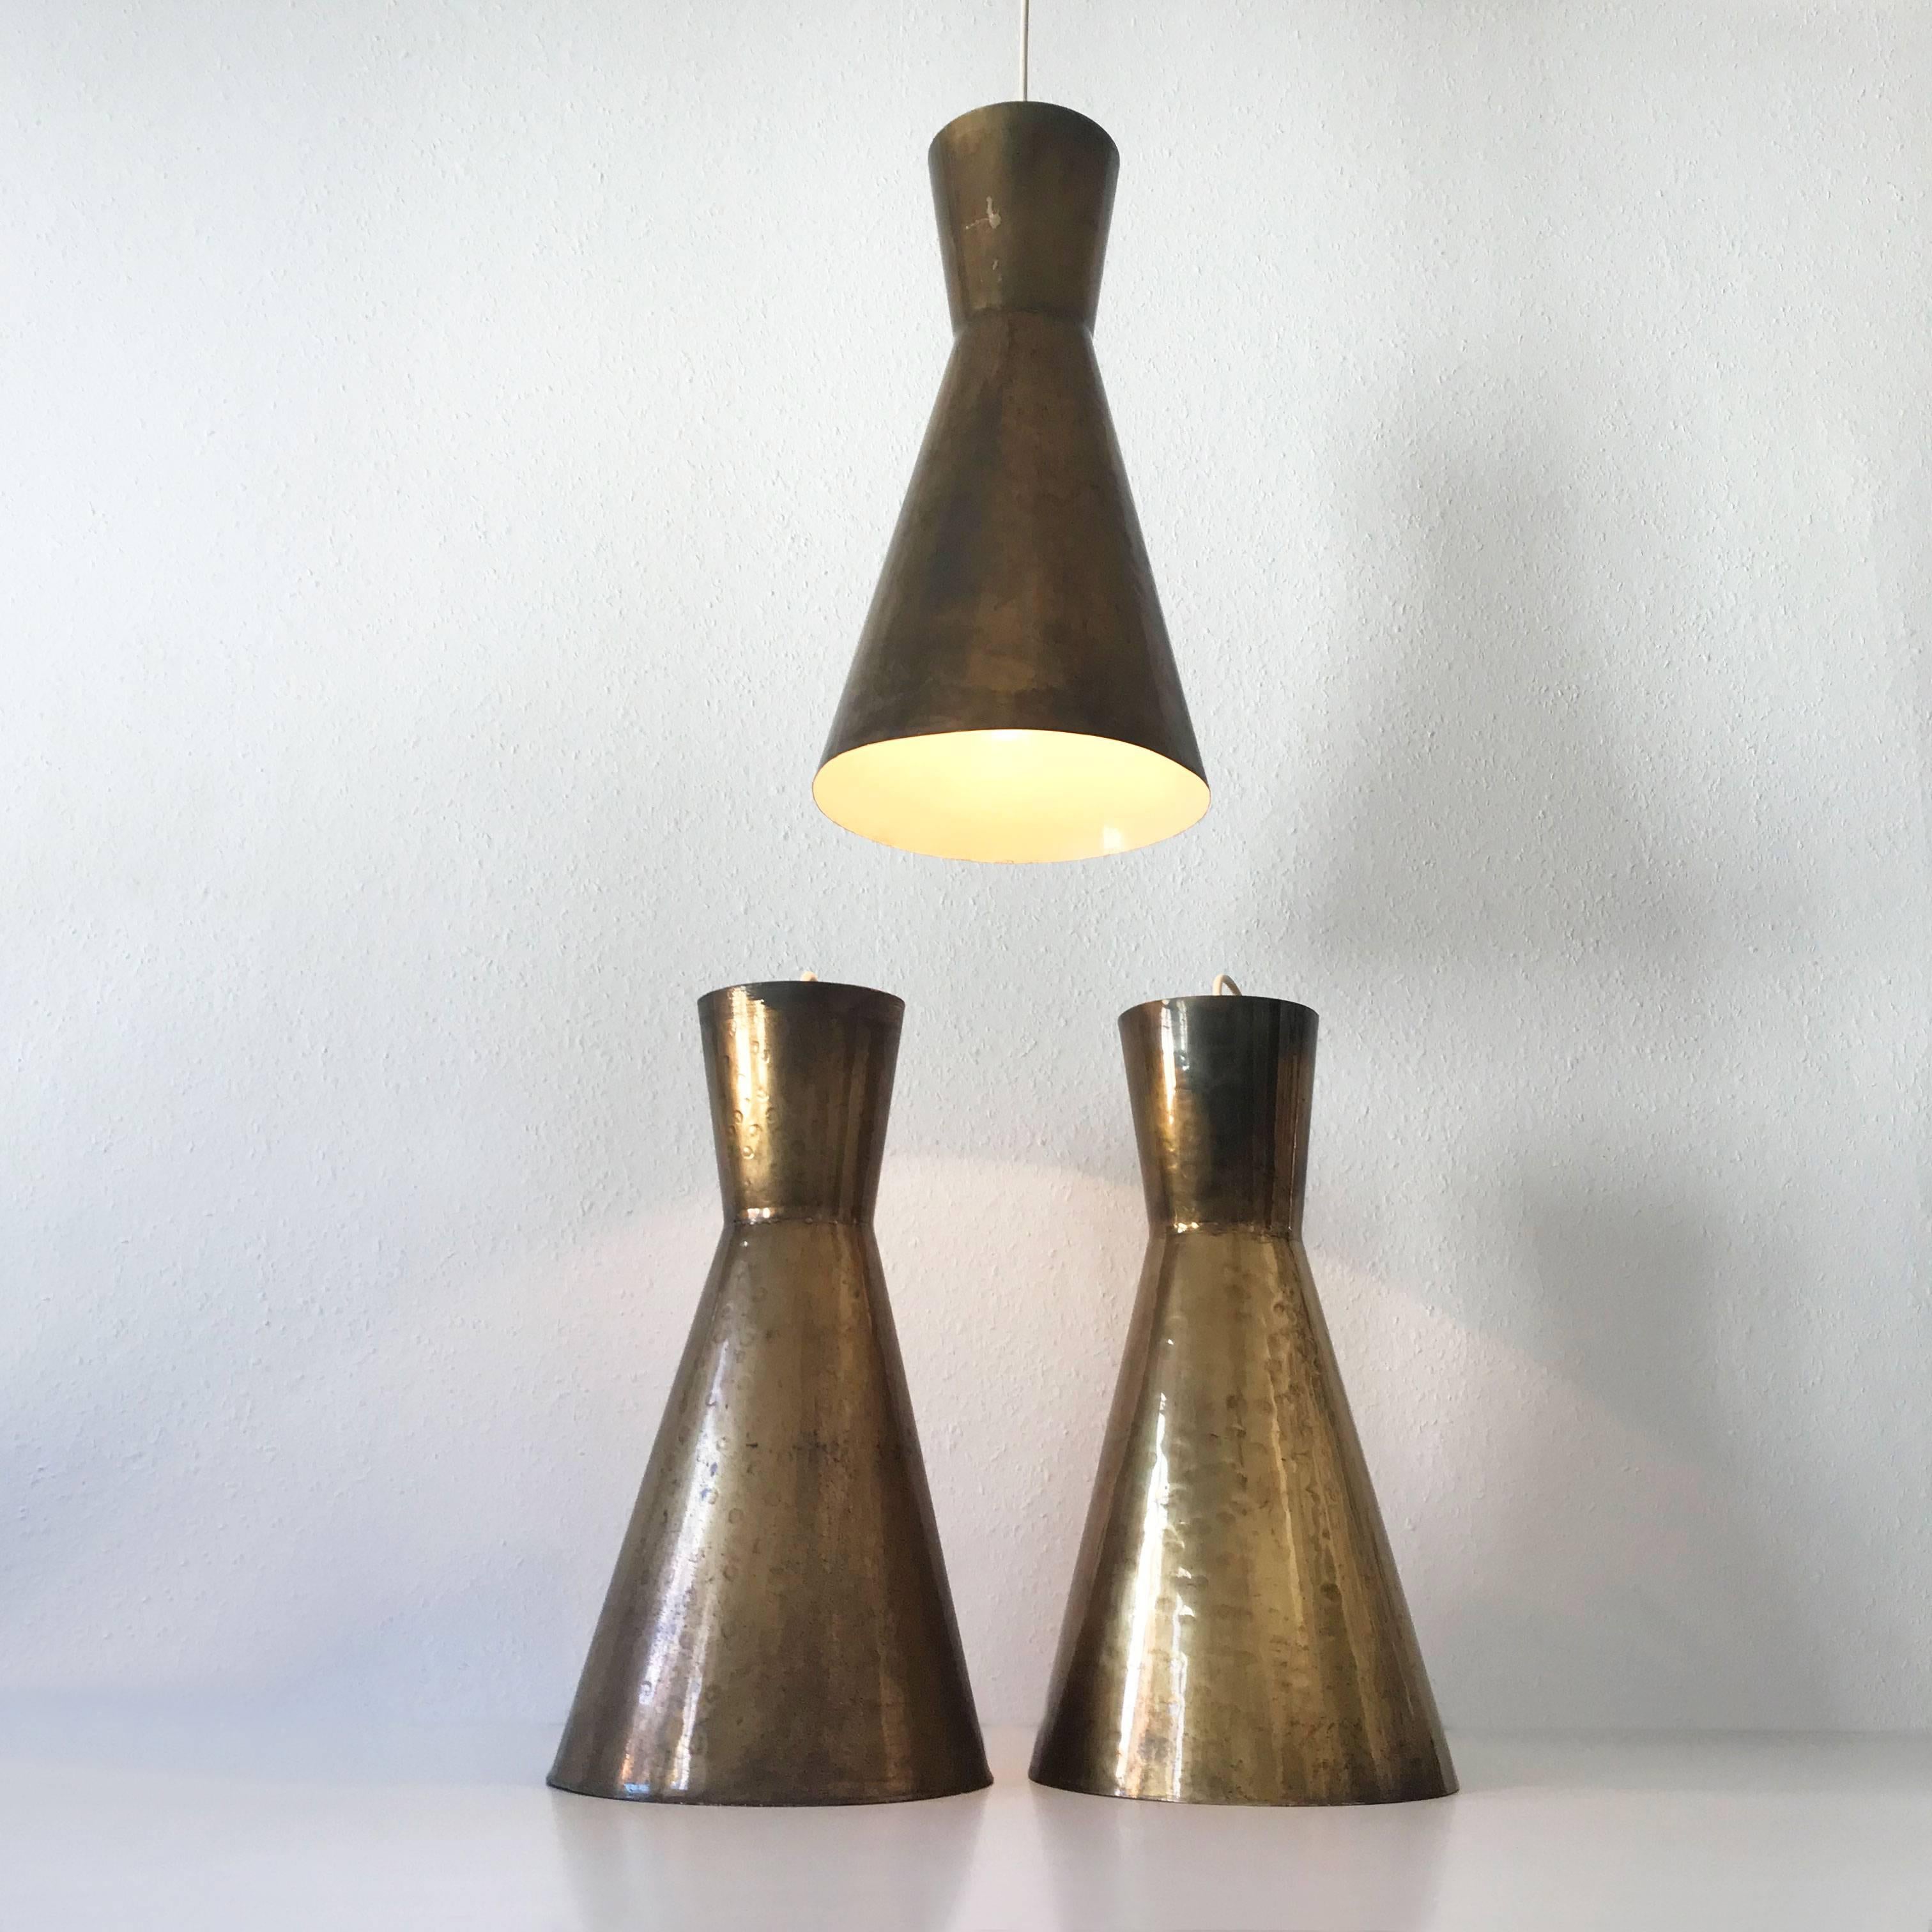 Set of three exceptional and large Mid Century Modern diabolo pendant lamps. Manufactured in Germany, 1950s.

Executed in hammered brass, each lamp needs 1 x E27 / E26 Edison screw fit bulb. They are wired, in working condition and run both on 110 /